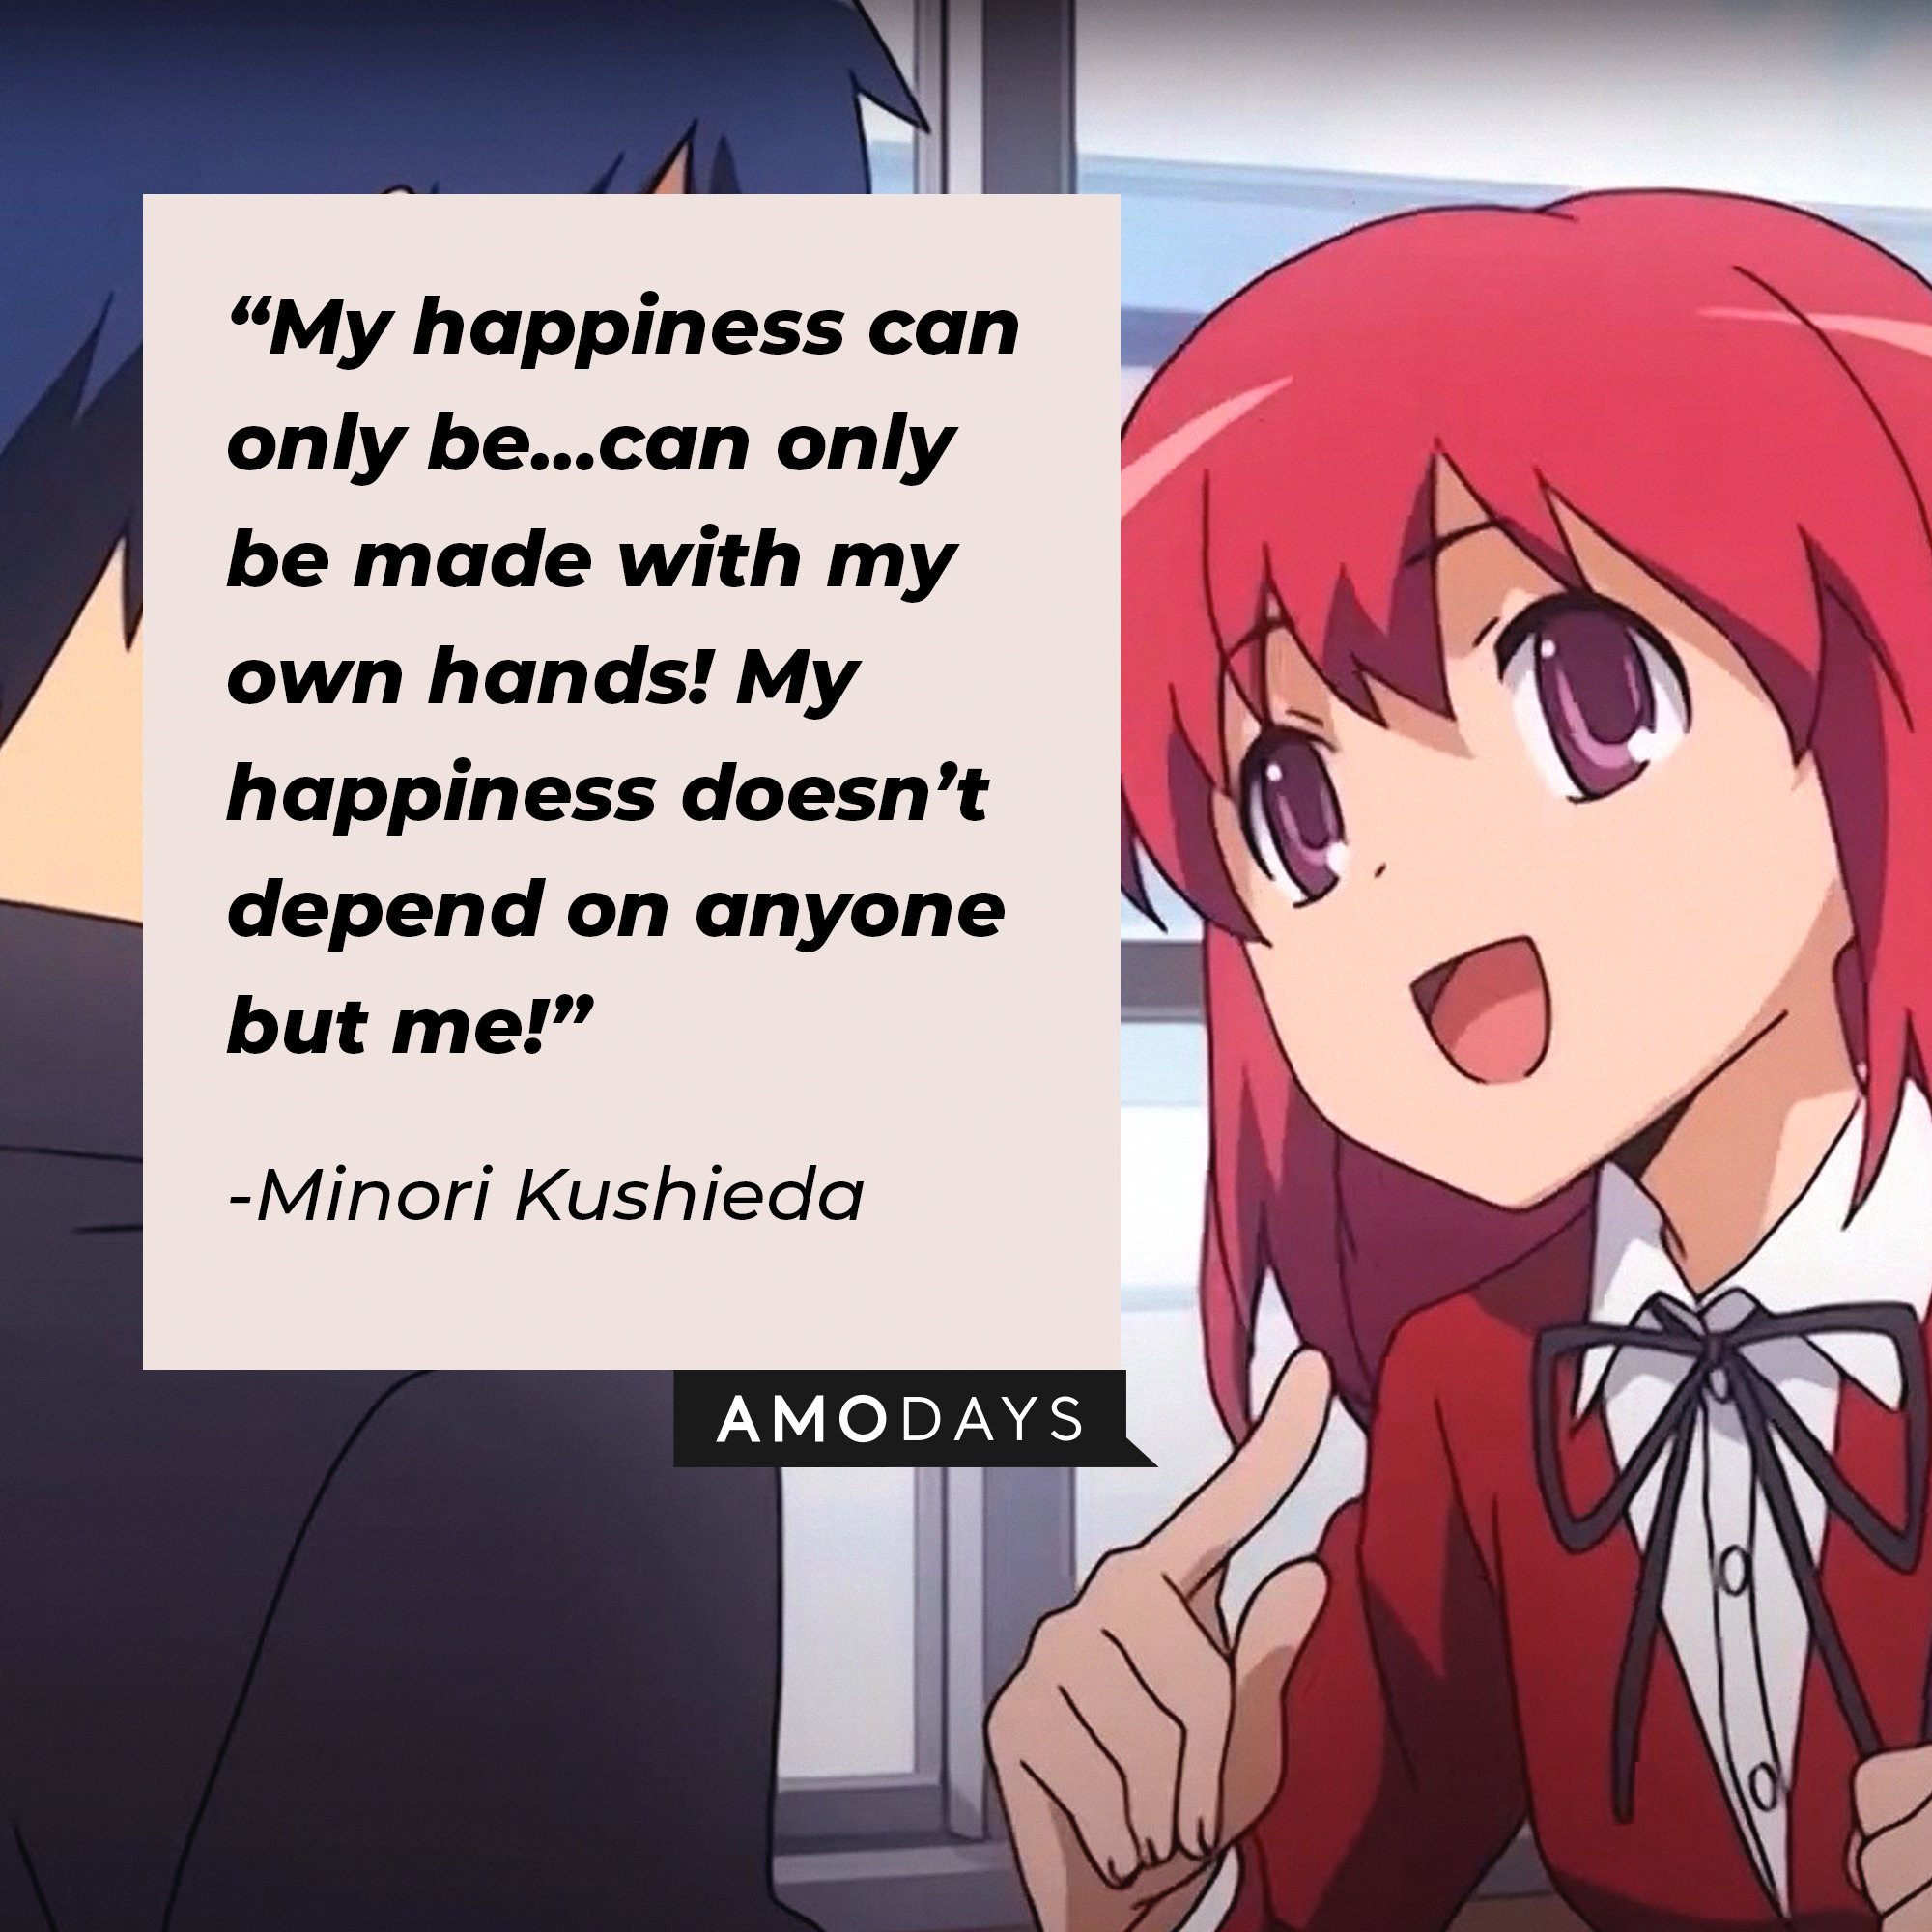 Minori Kushieda’s quote: “My happiness can only be…can only be made with my own hands! My happiness doesn’t depend on anyone but me!” | Image: AmoDays